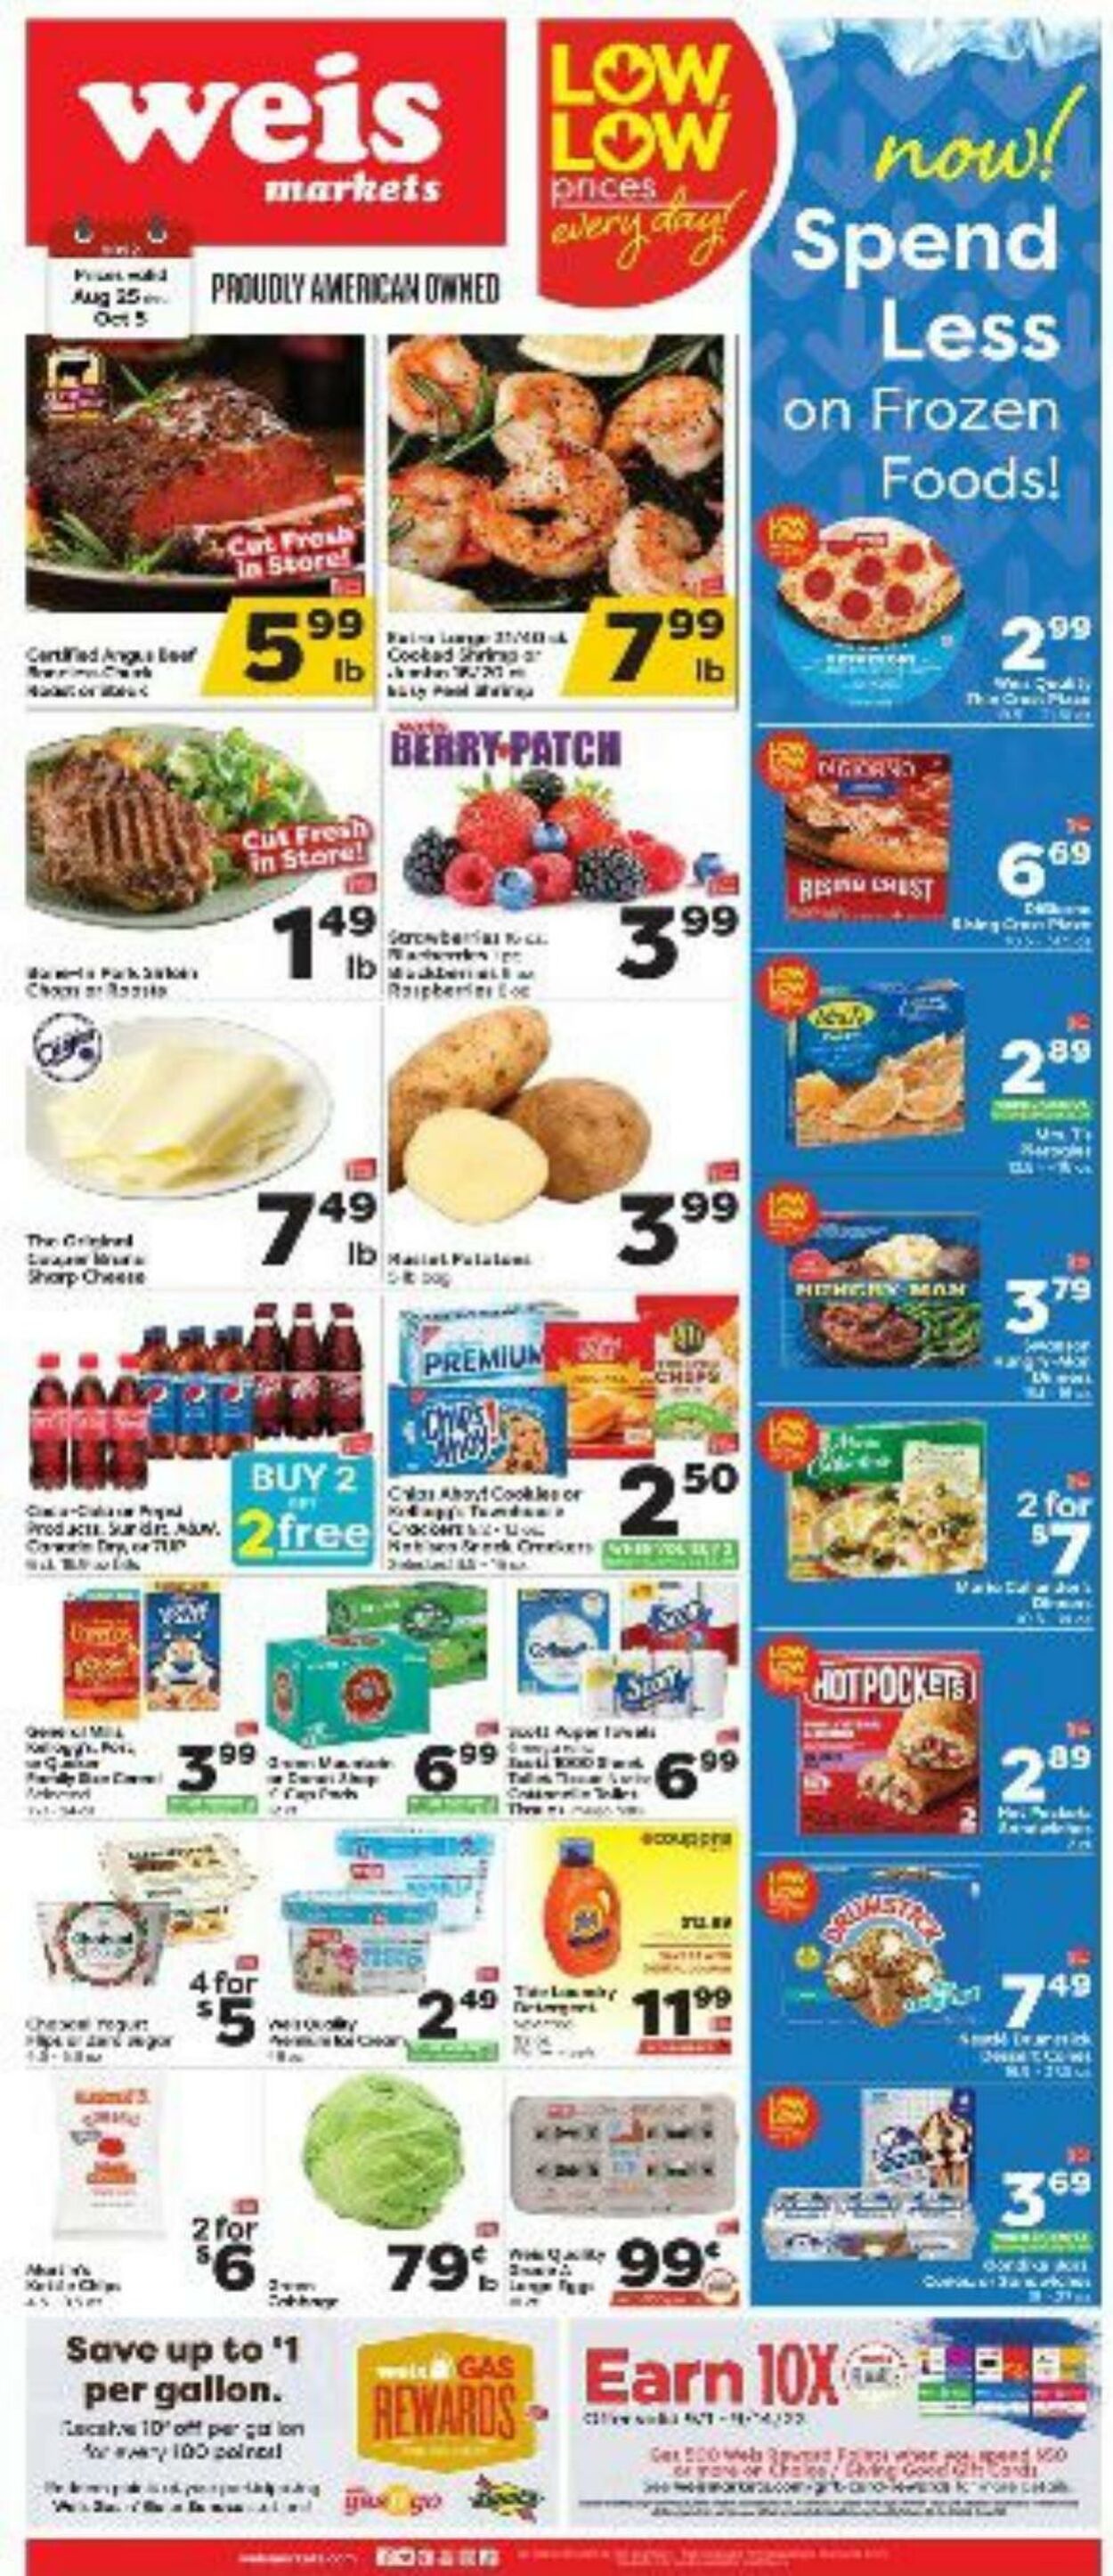 Weis Promotional weekly ads